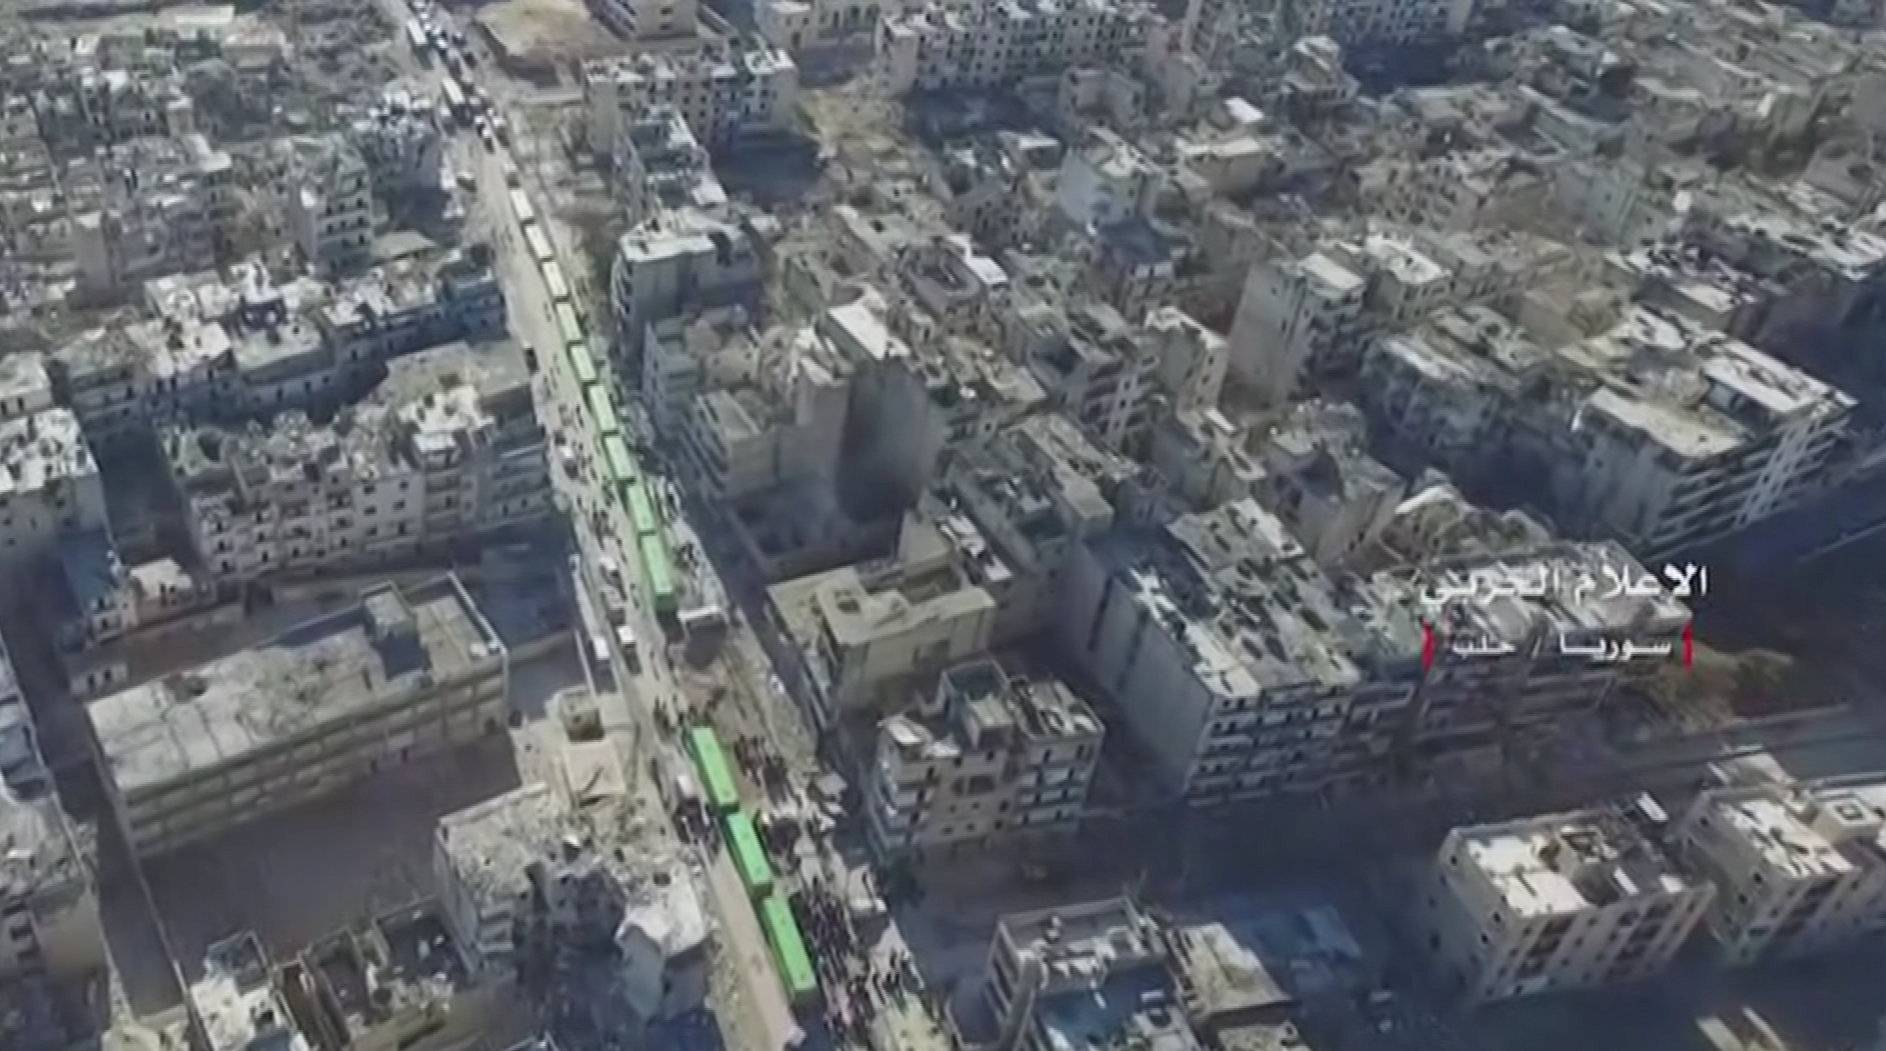 A still image from video taken December 15, 2016 over eastern Aleppo shows an operation to evacuate thousands of civilians and fighters in buses from Aleppo